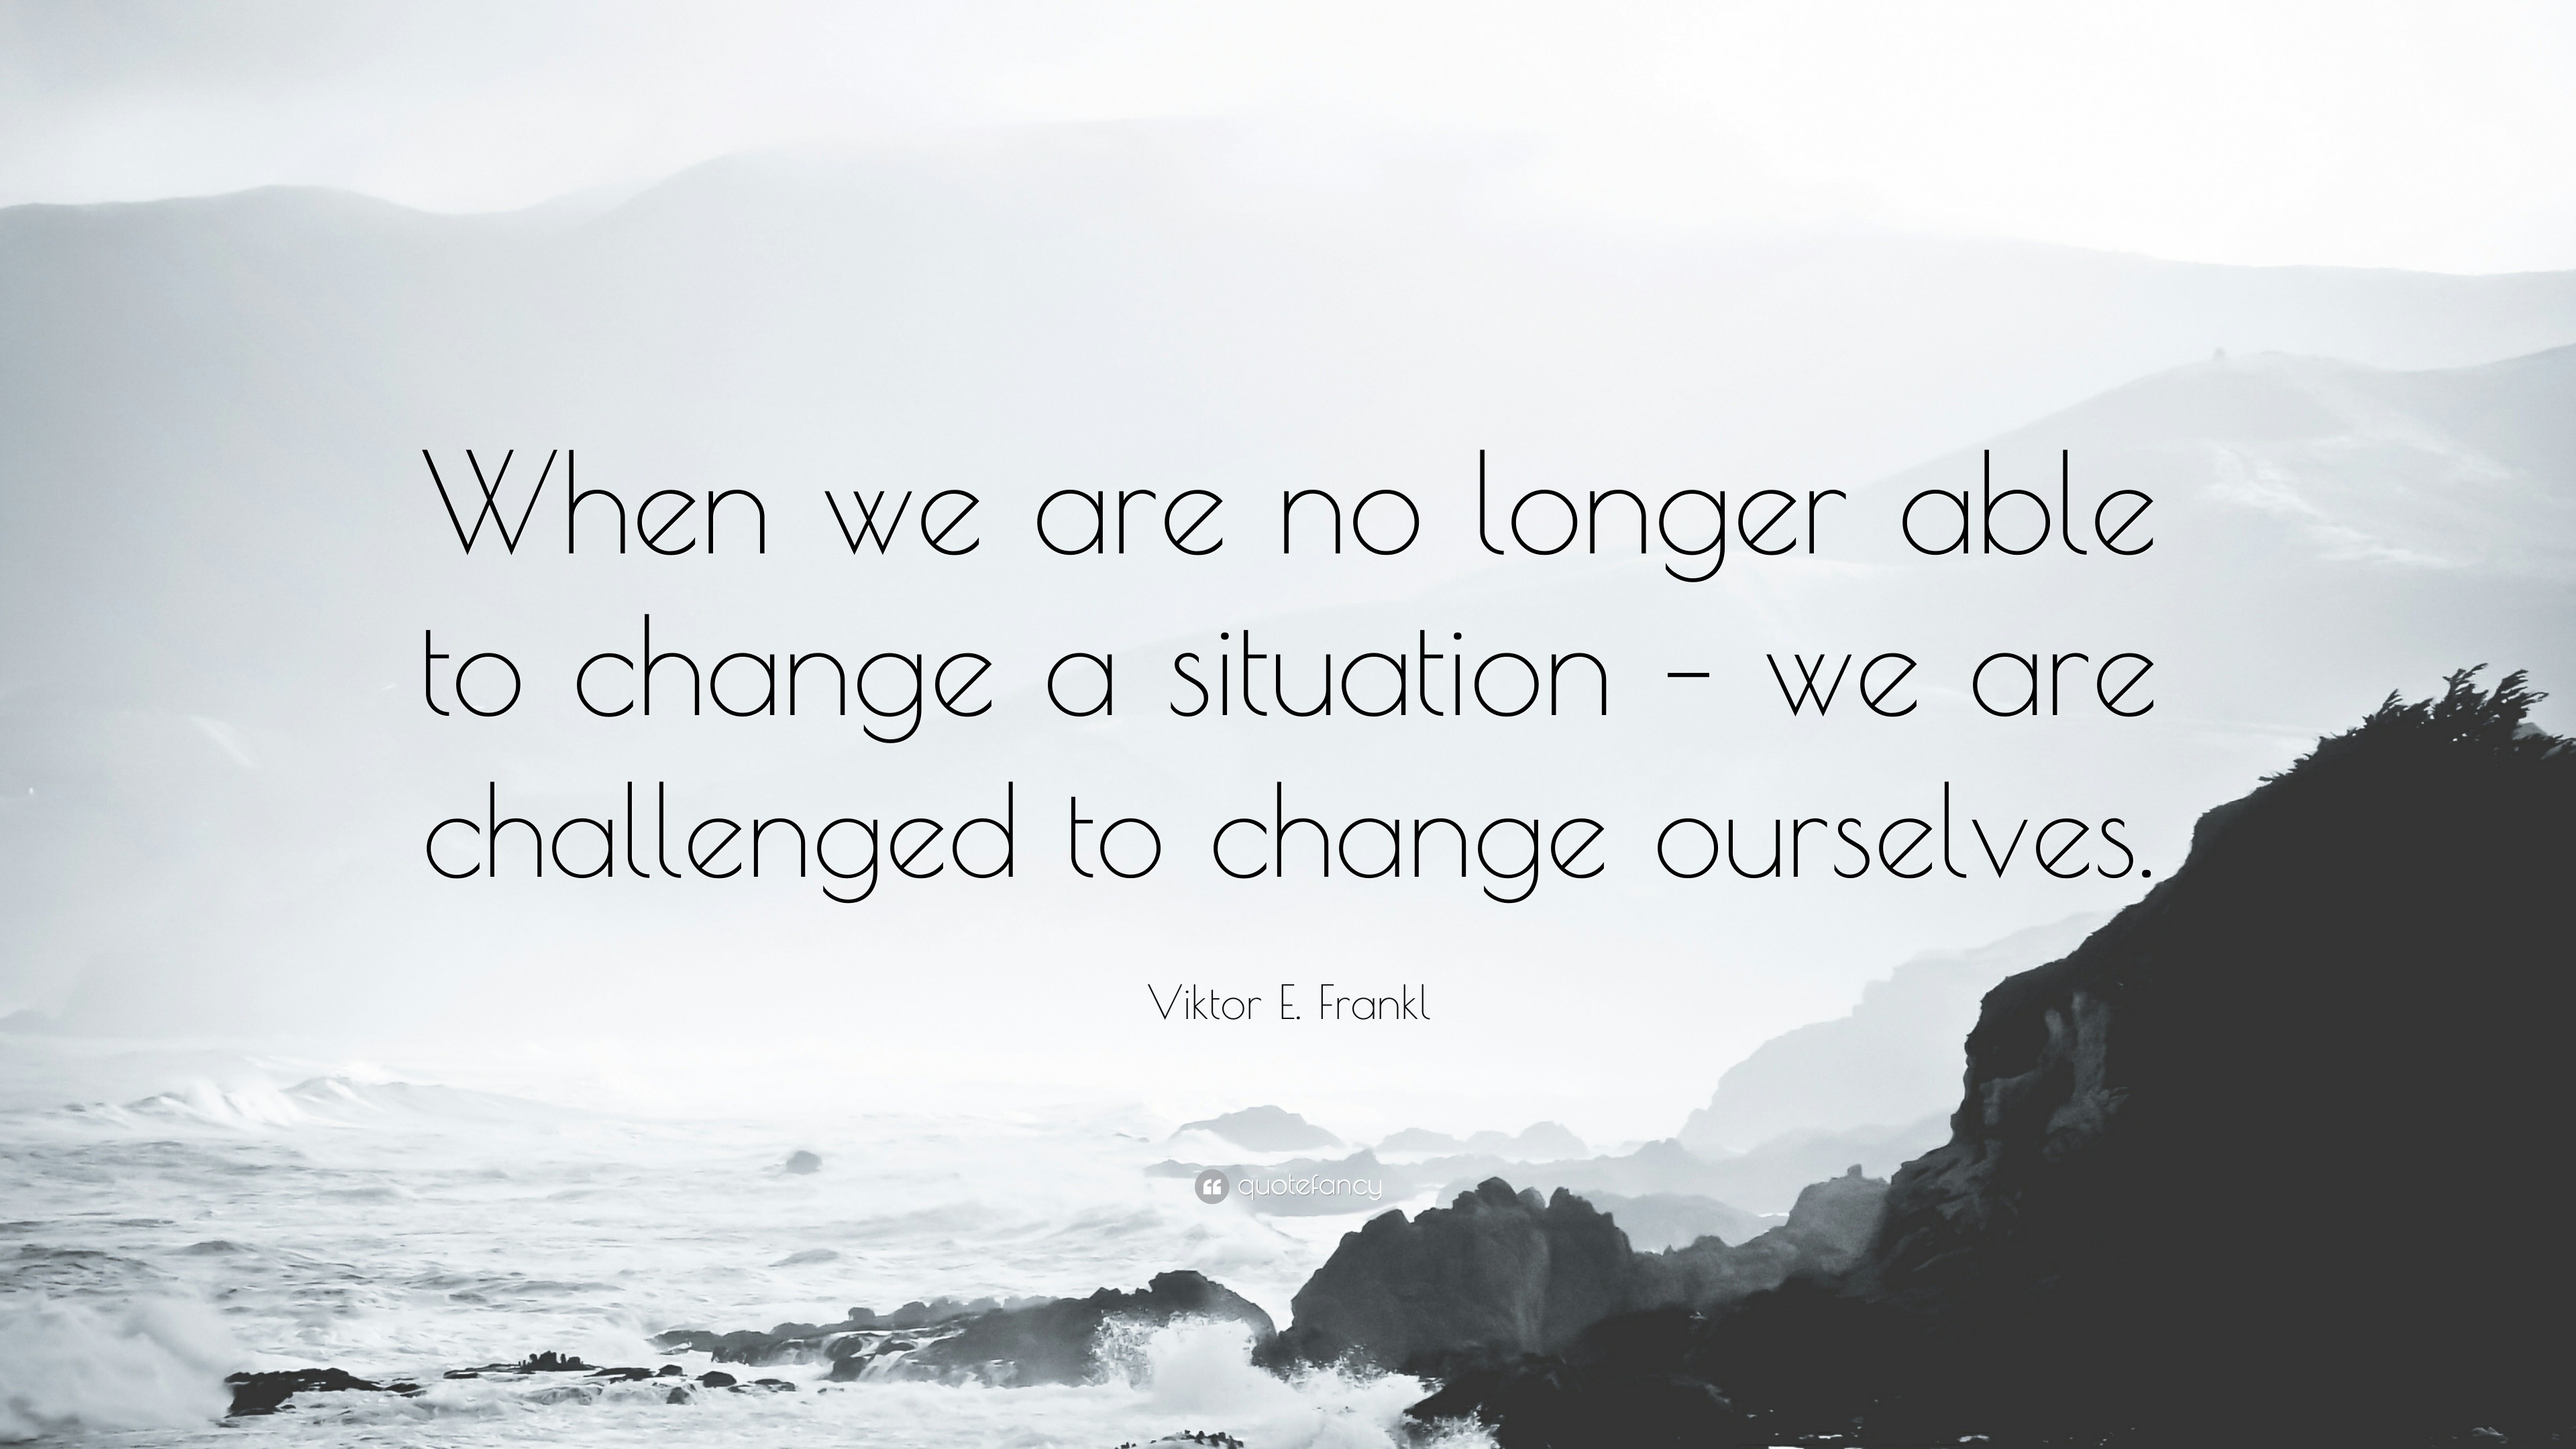 Viktor E. Frankl Quote: “When we are no longer able to change a